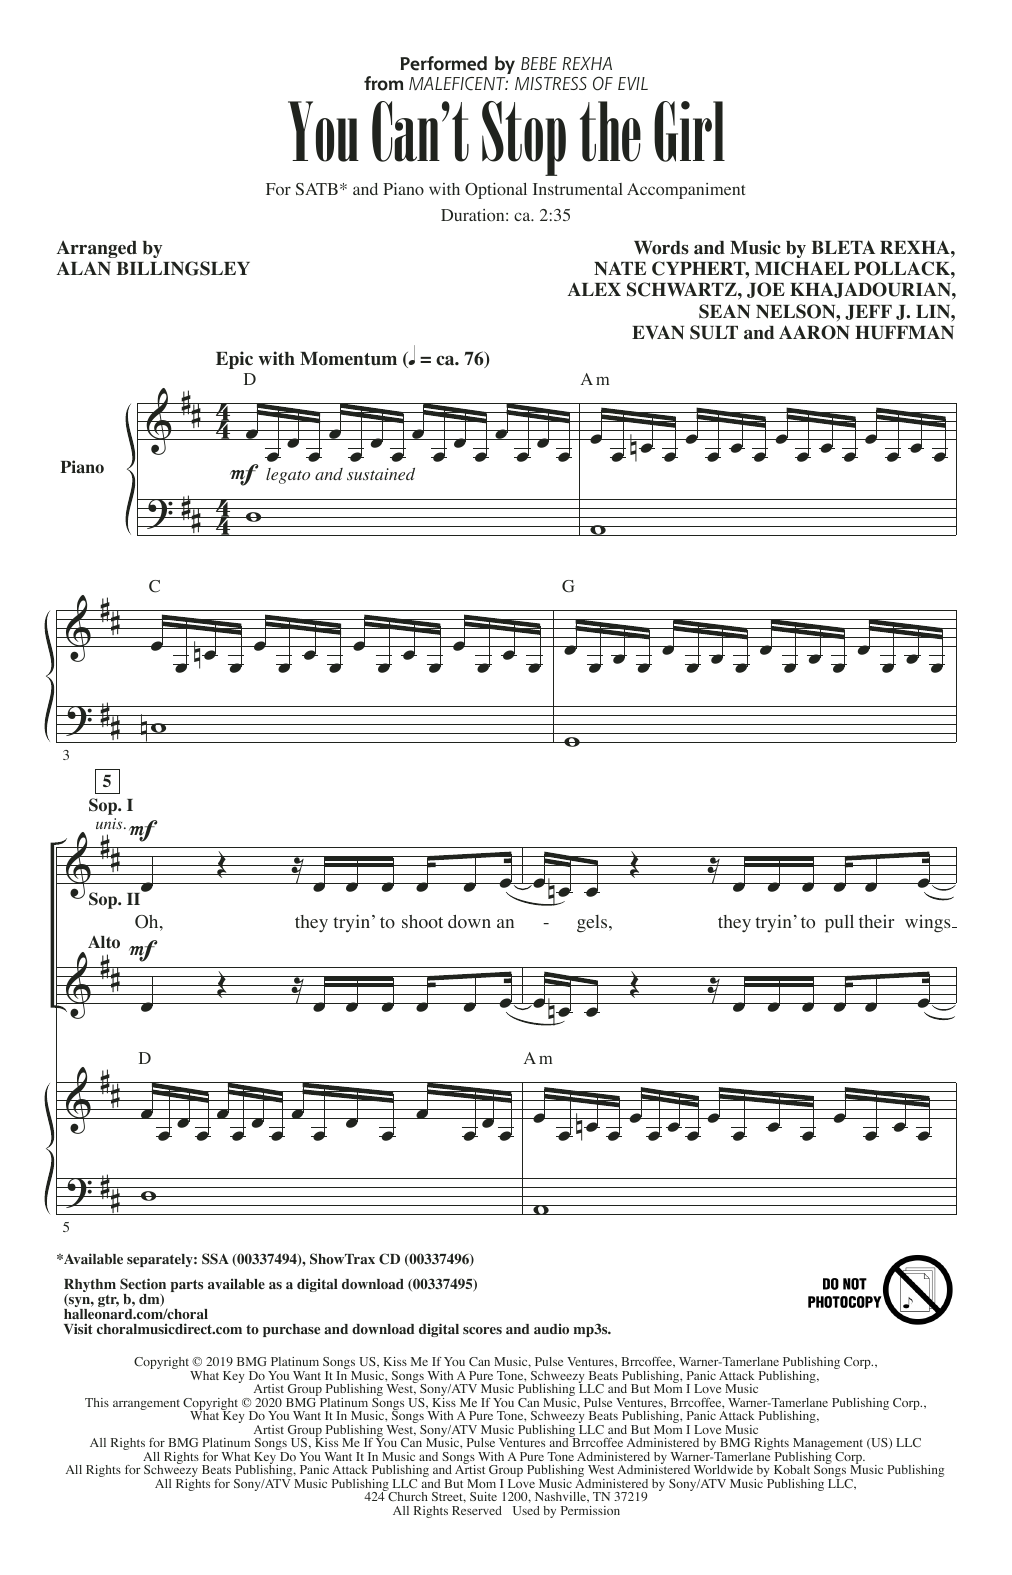 Bebe Rexha You Can't Stop The Girl (from Disney's Maleficent: Mistress of Evil) (arr. Alan Billingsley) sheet music notes and chords. Download Printable PDF.